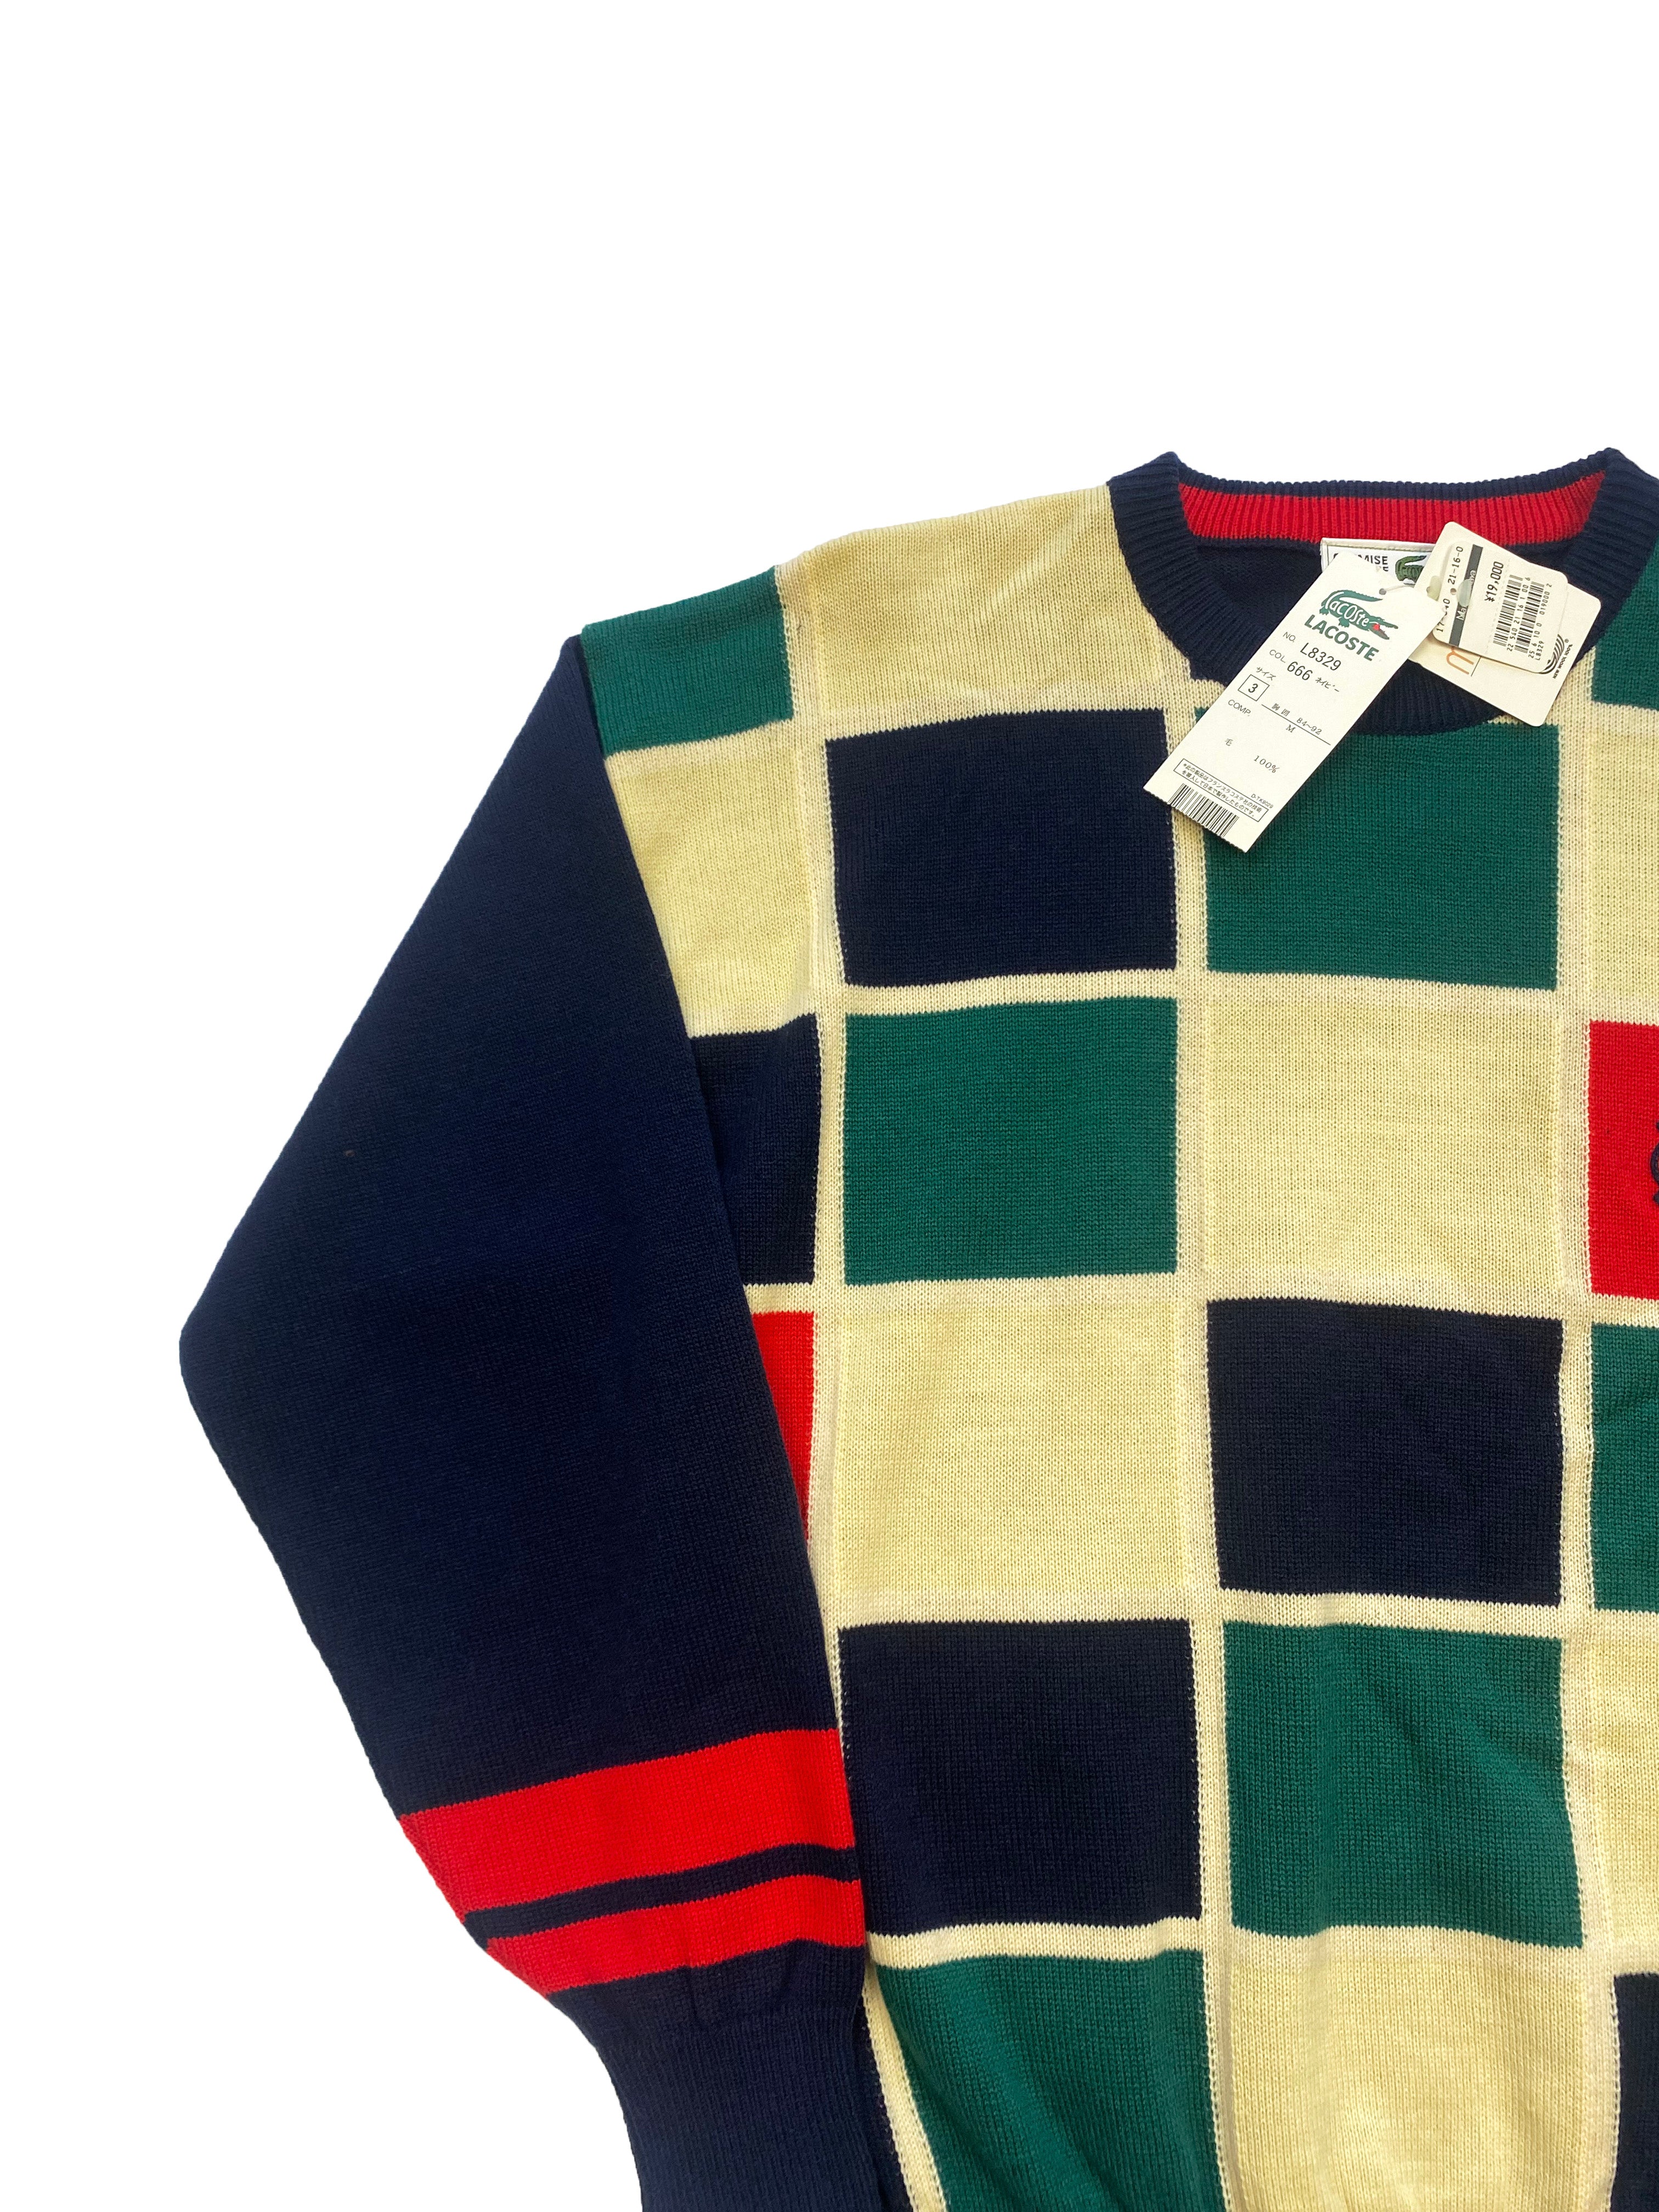 Chemise Lacoste Knit Jumper BNWT 80's